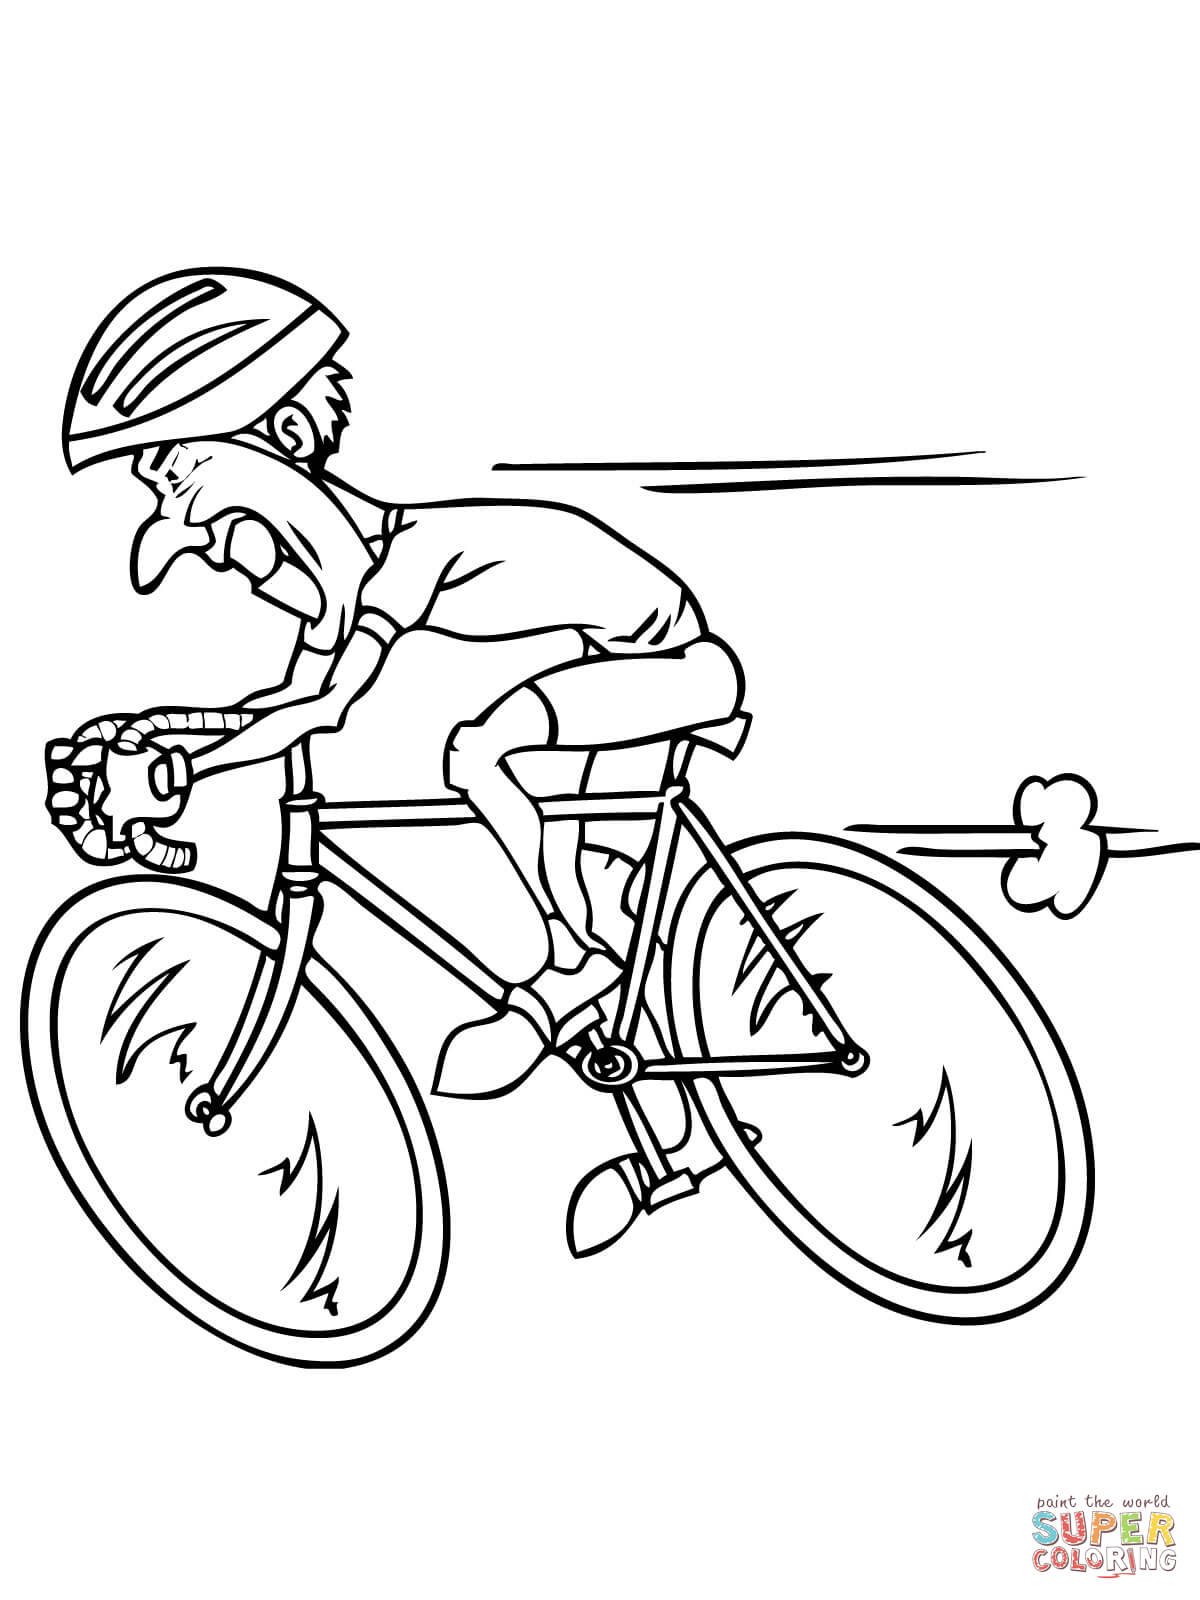 Bicycles coloring pages | Free Coloring Pages